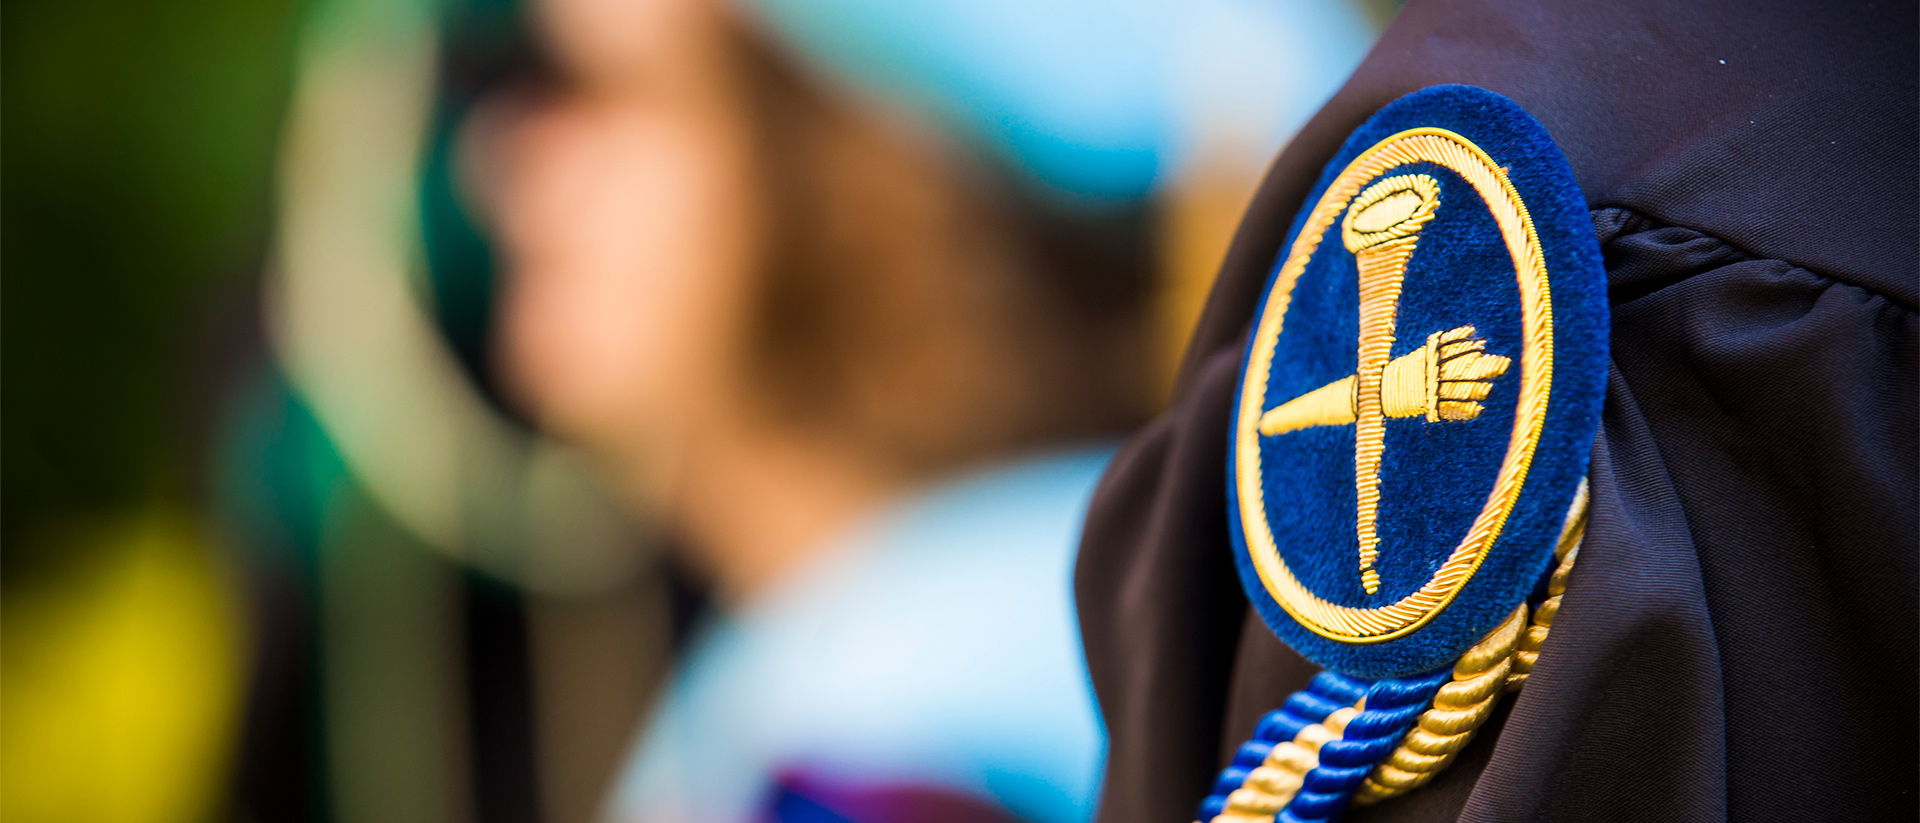 a close up image of the Emory shield emblem on a Commencement gown